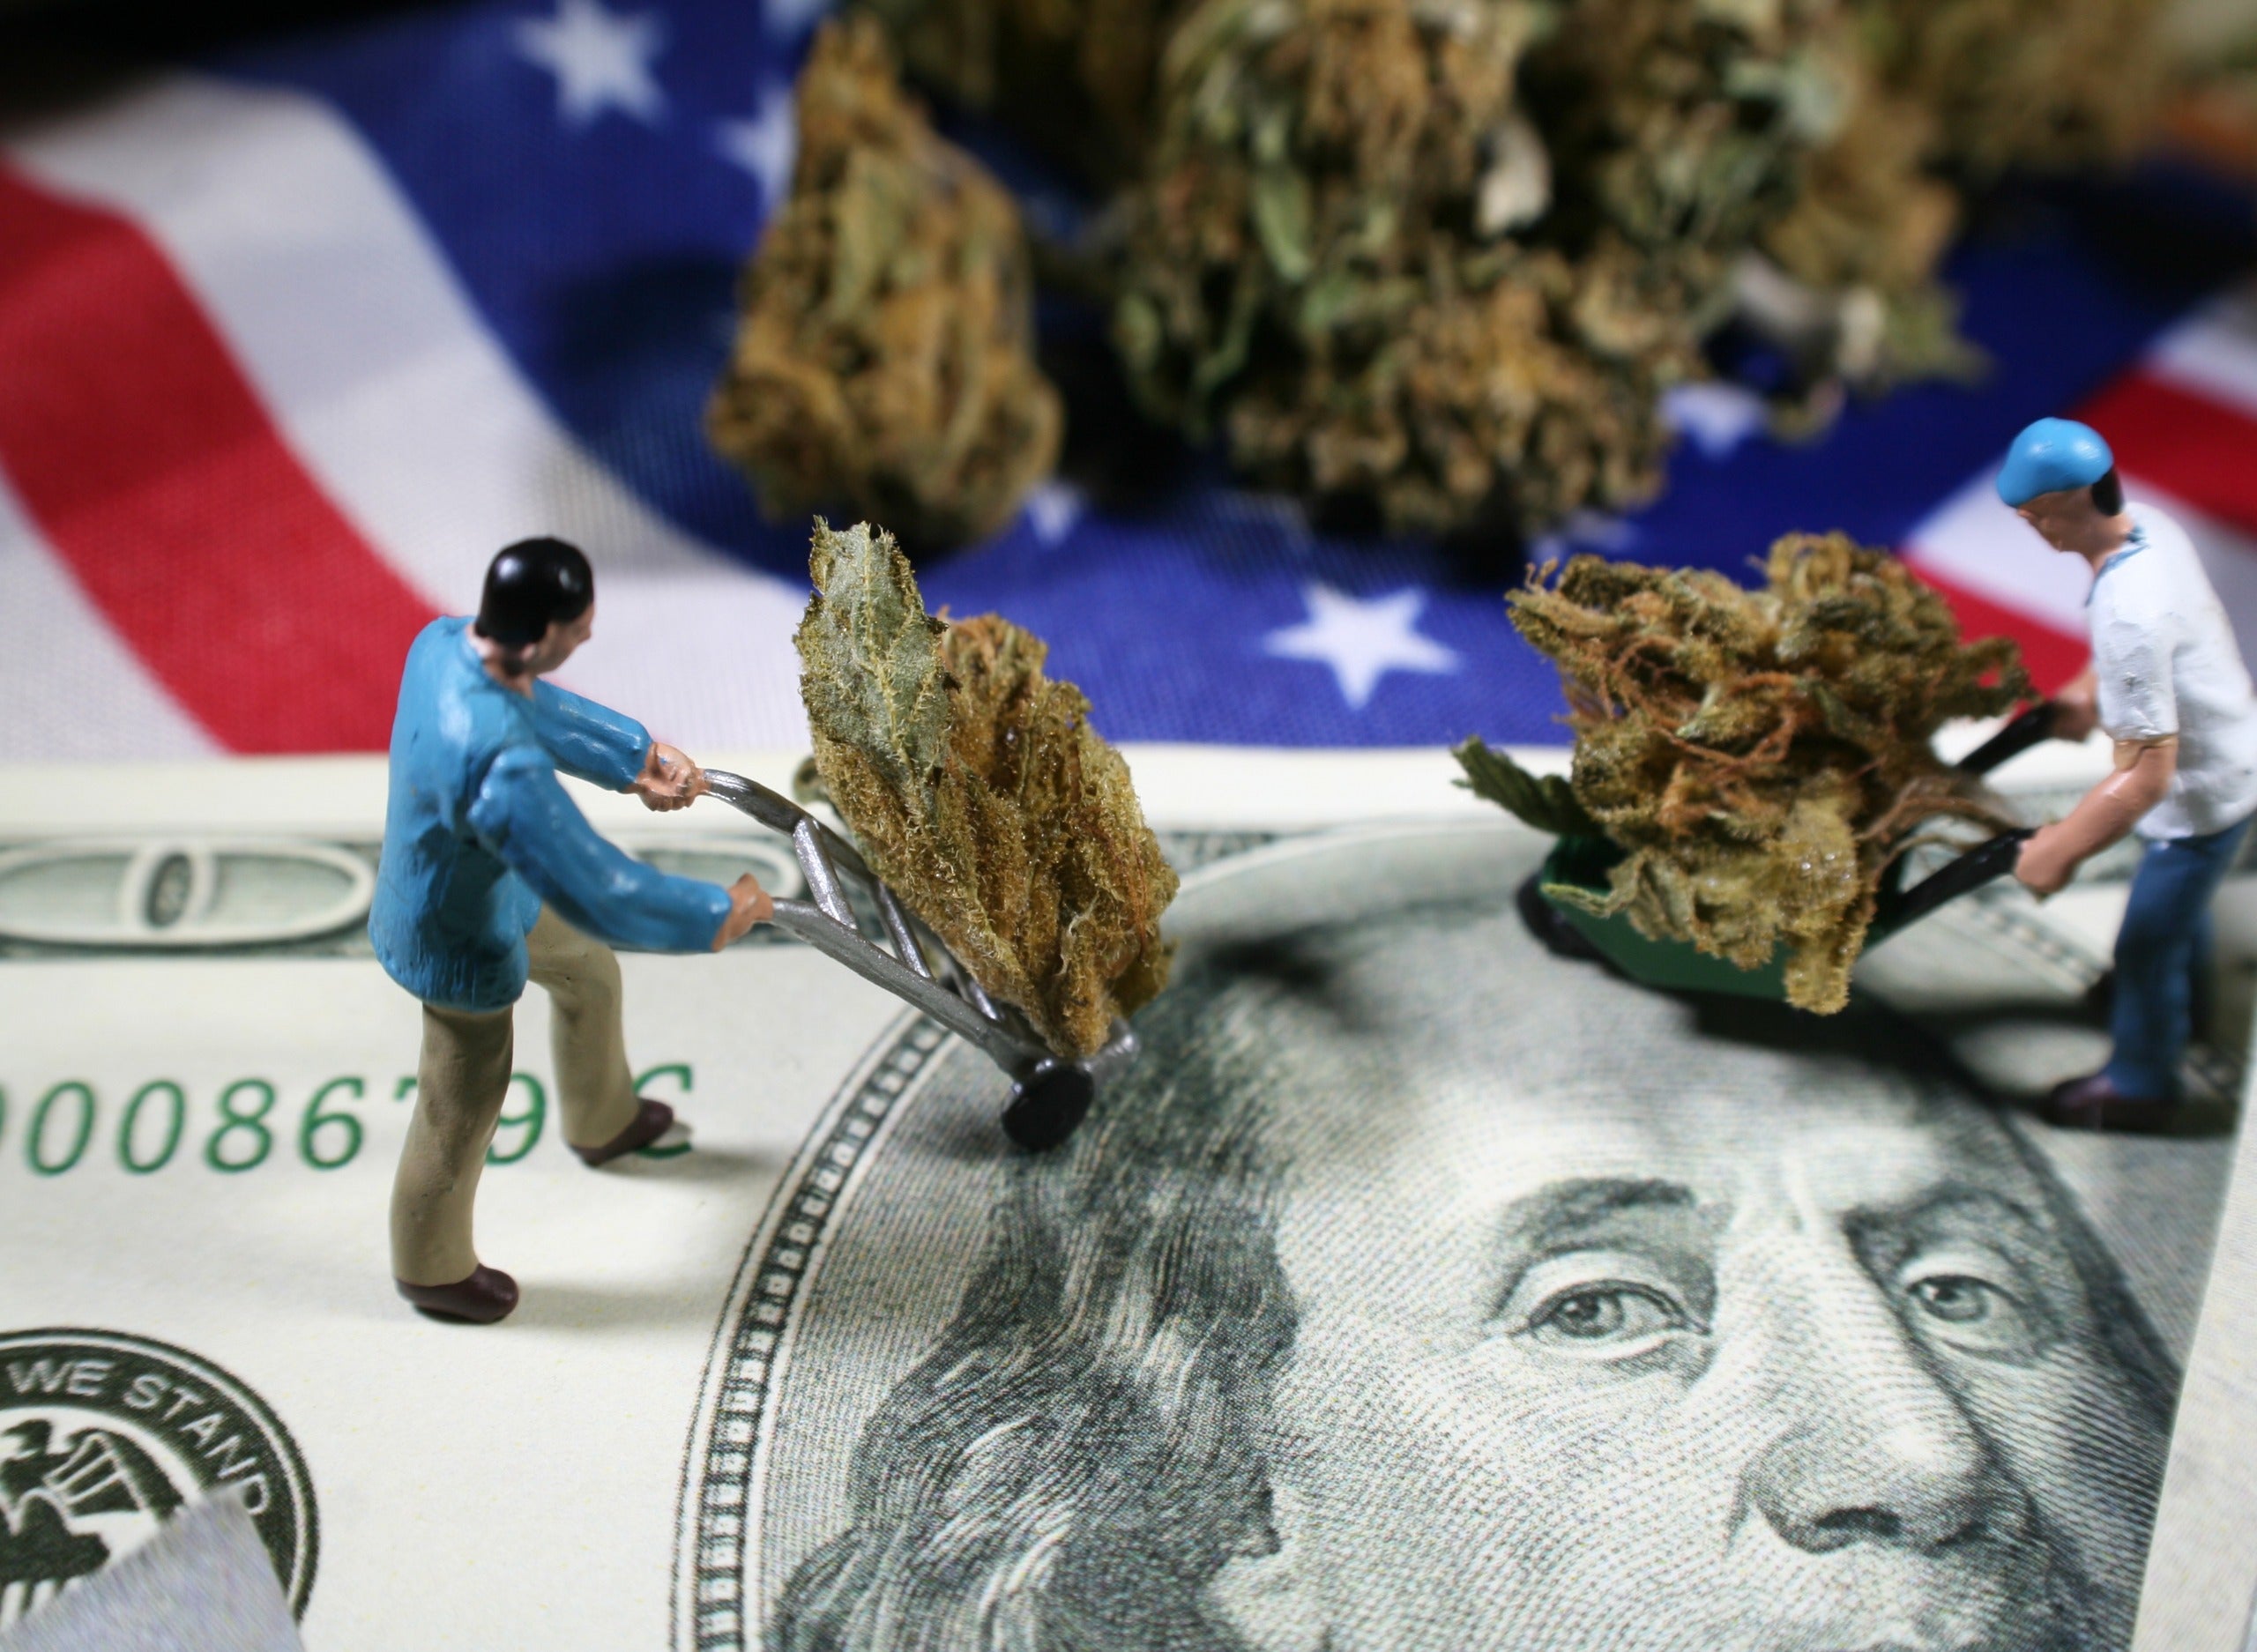 Wholesale Marijuana Prices Rise In Key States But Are Expected To Fall Soon